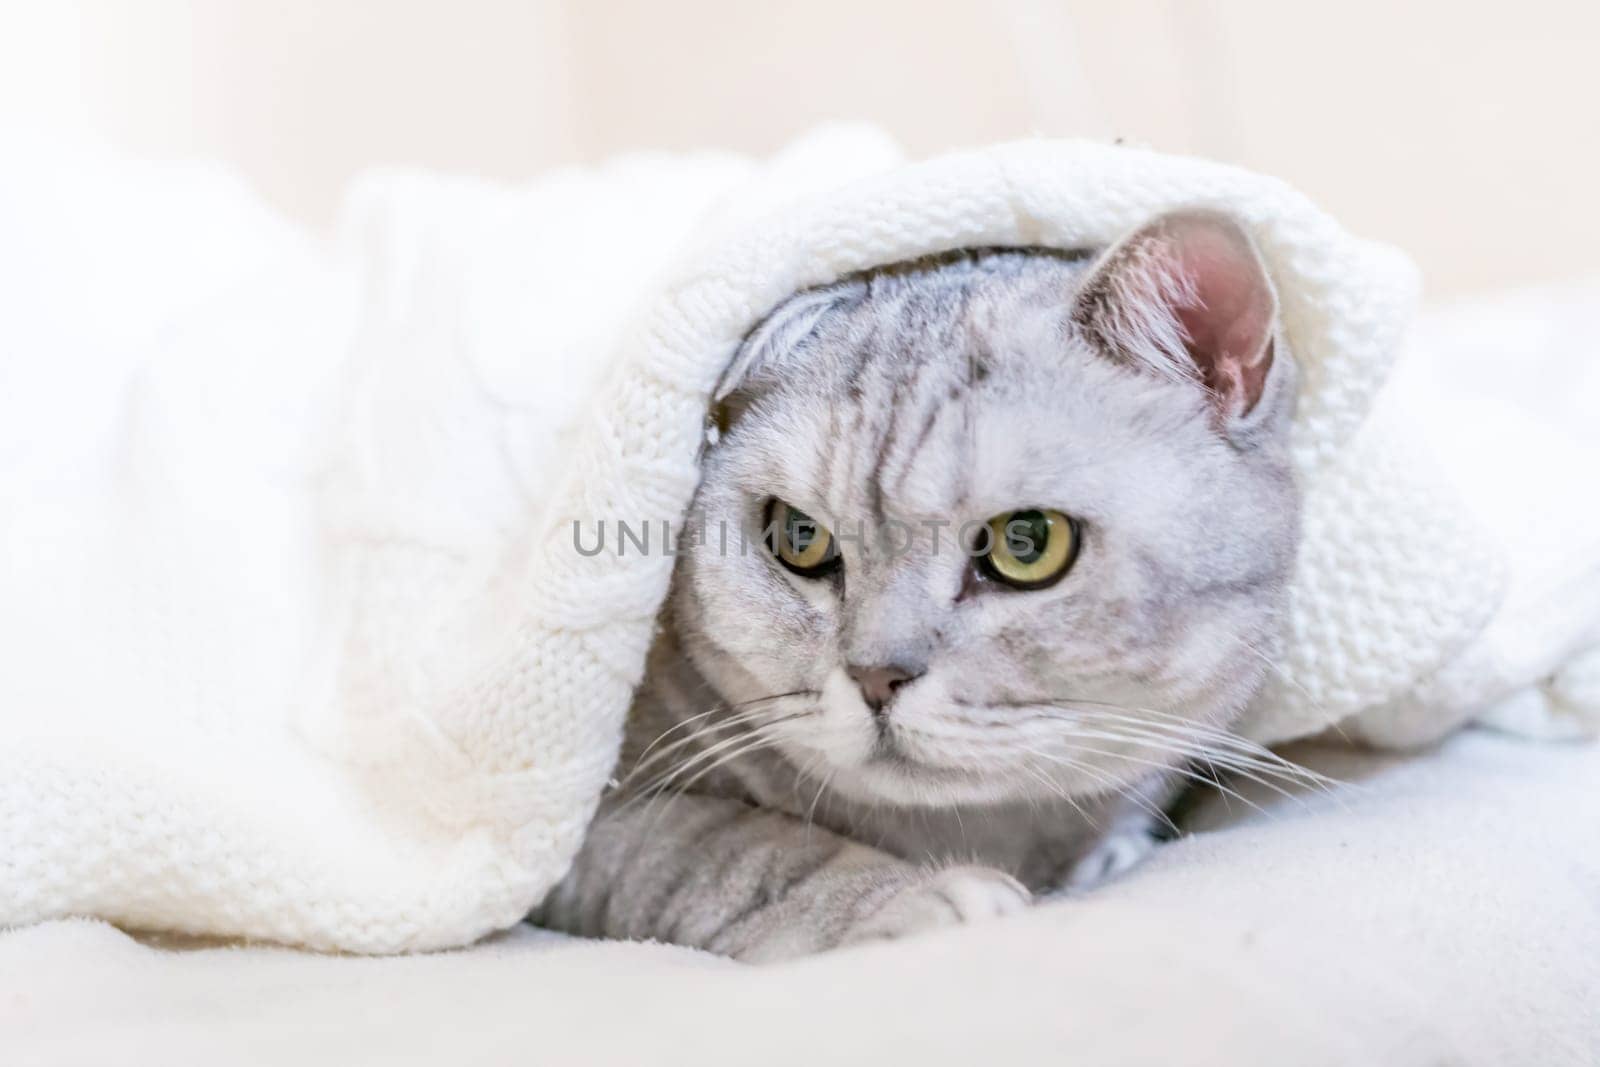 Relaxed Scottish cat wrapped in white blanket muzzle close up. Where: Unspecified location. Comfortable setting. Conveying cat's relaxation in cozy blanket. by Matiunina